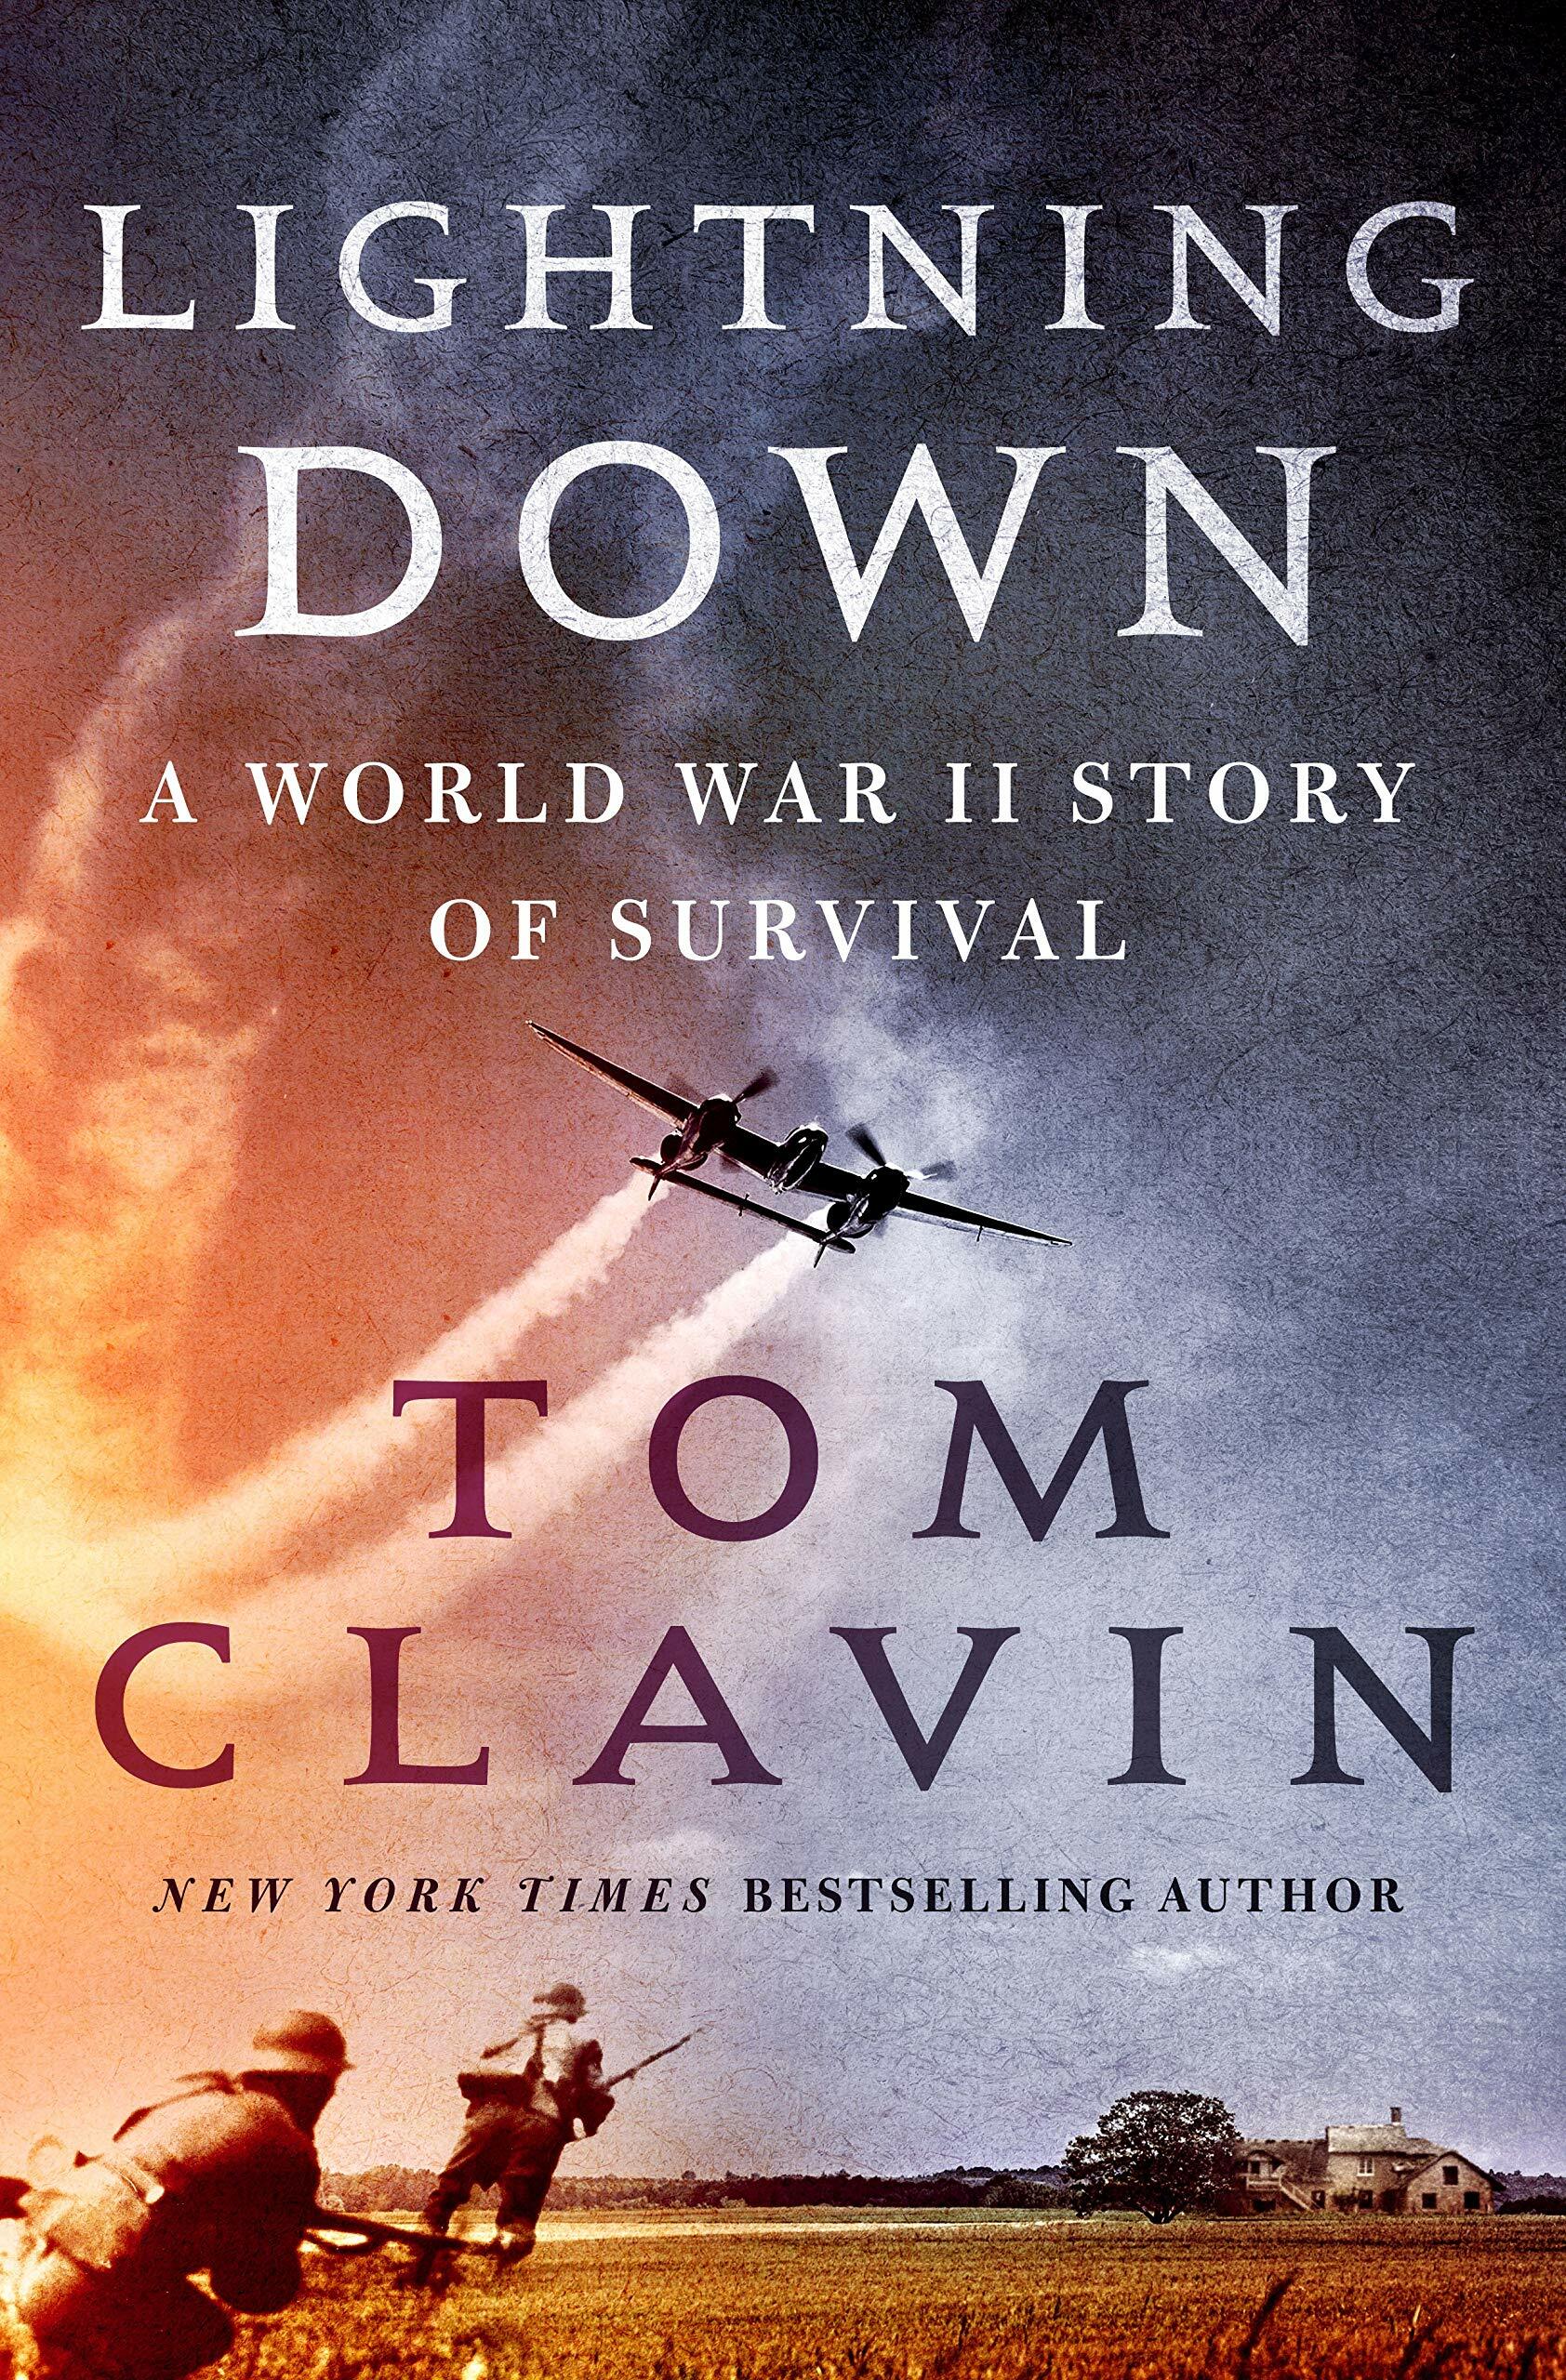 Tom Clavin’s new book “Lightning Down: A World War II Story of Survival.”